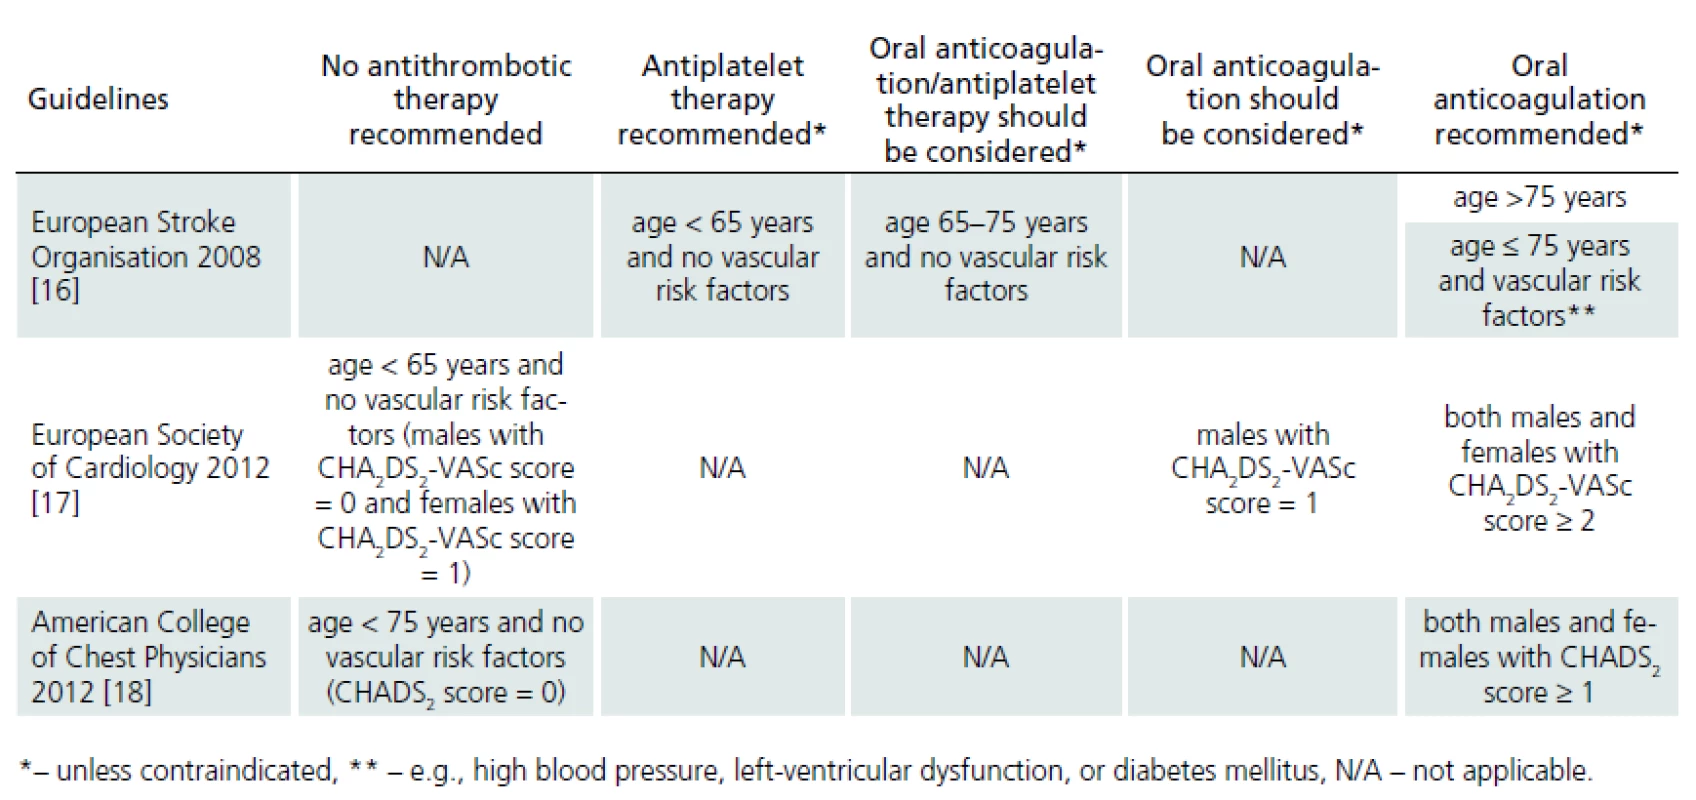 Indication of antithrombotic therapy in patients with non-valvular atrial fibrillation.